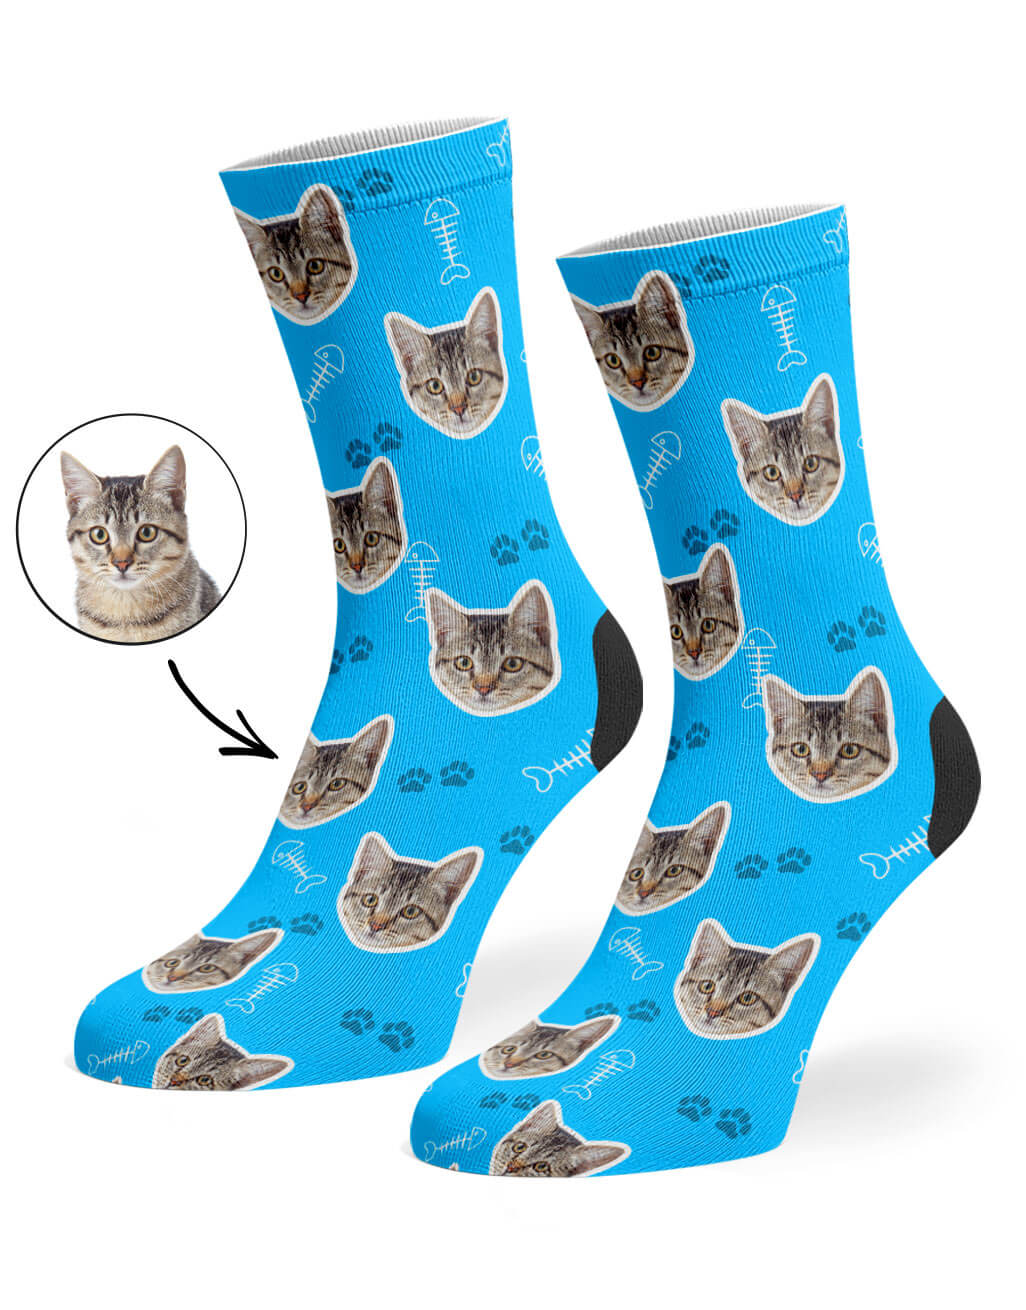 cat socks featuring your photo